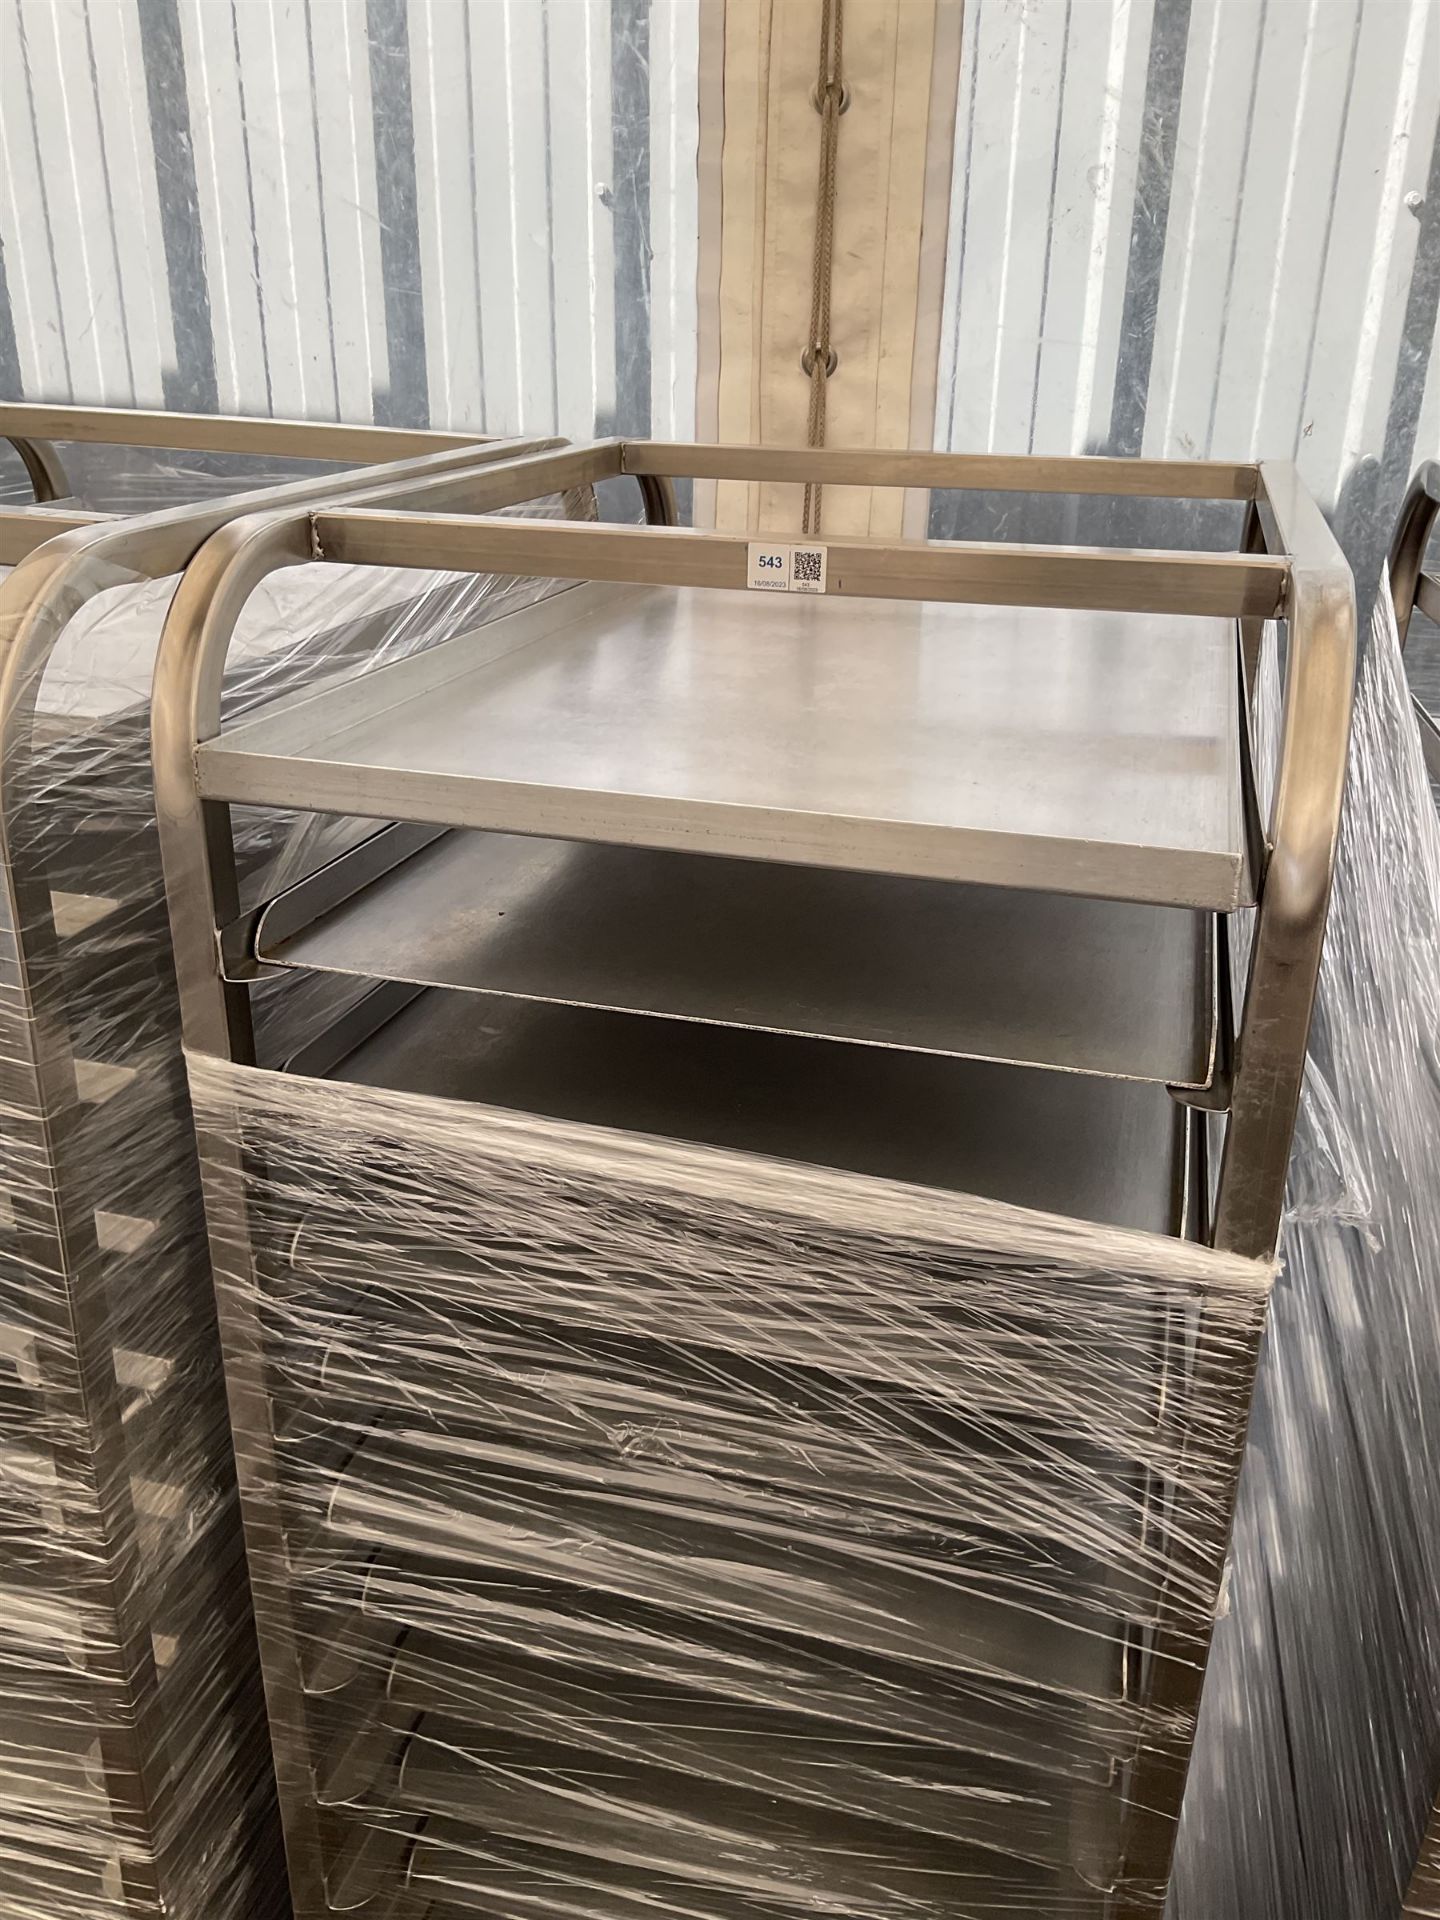 Stainless steel commercial tray rack trolley - Image 3 of 3